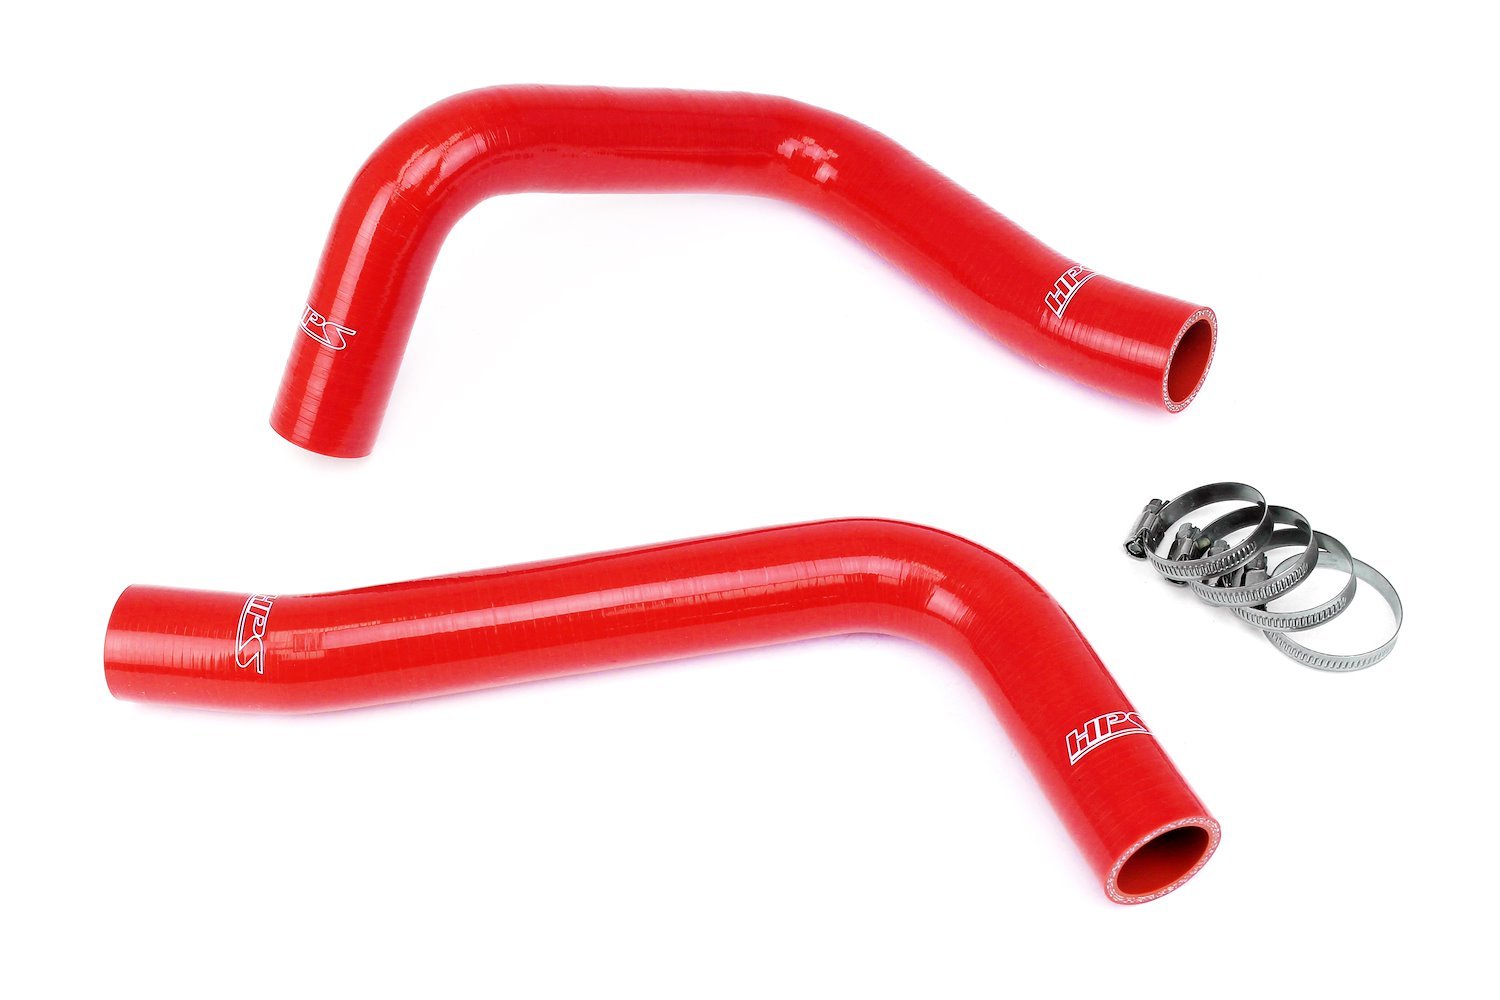 57-2056-RED Radiator Hose Kit, 3-Ply Reinforced Silicone, Replaces Rubber Radiator Coolant Hoses